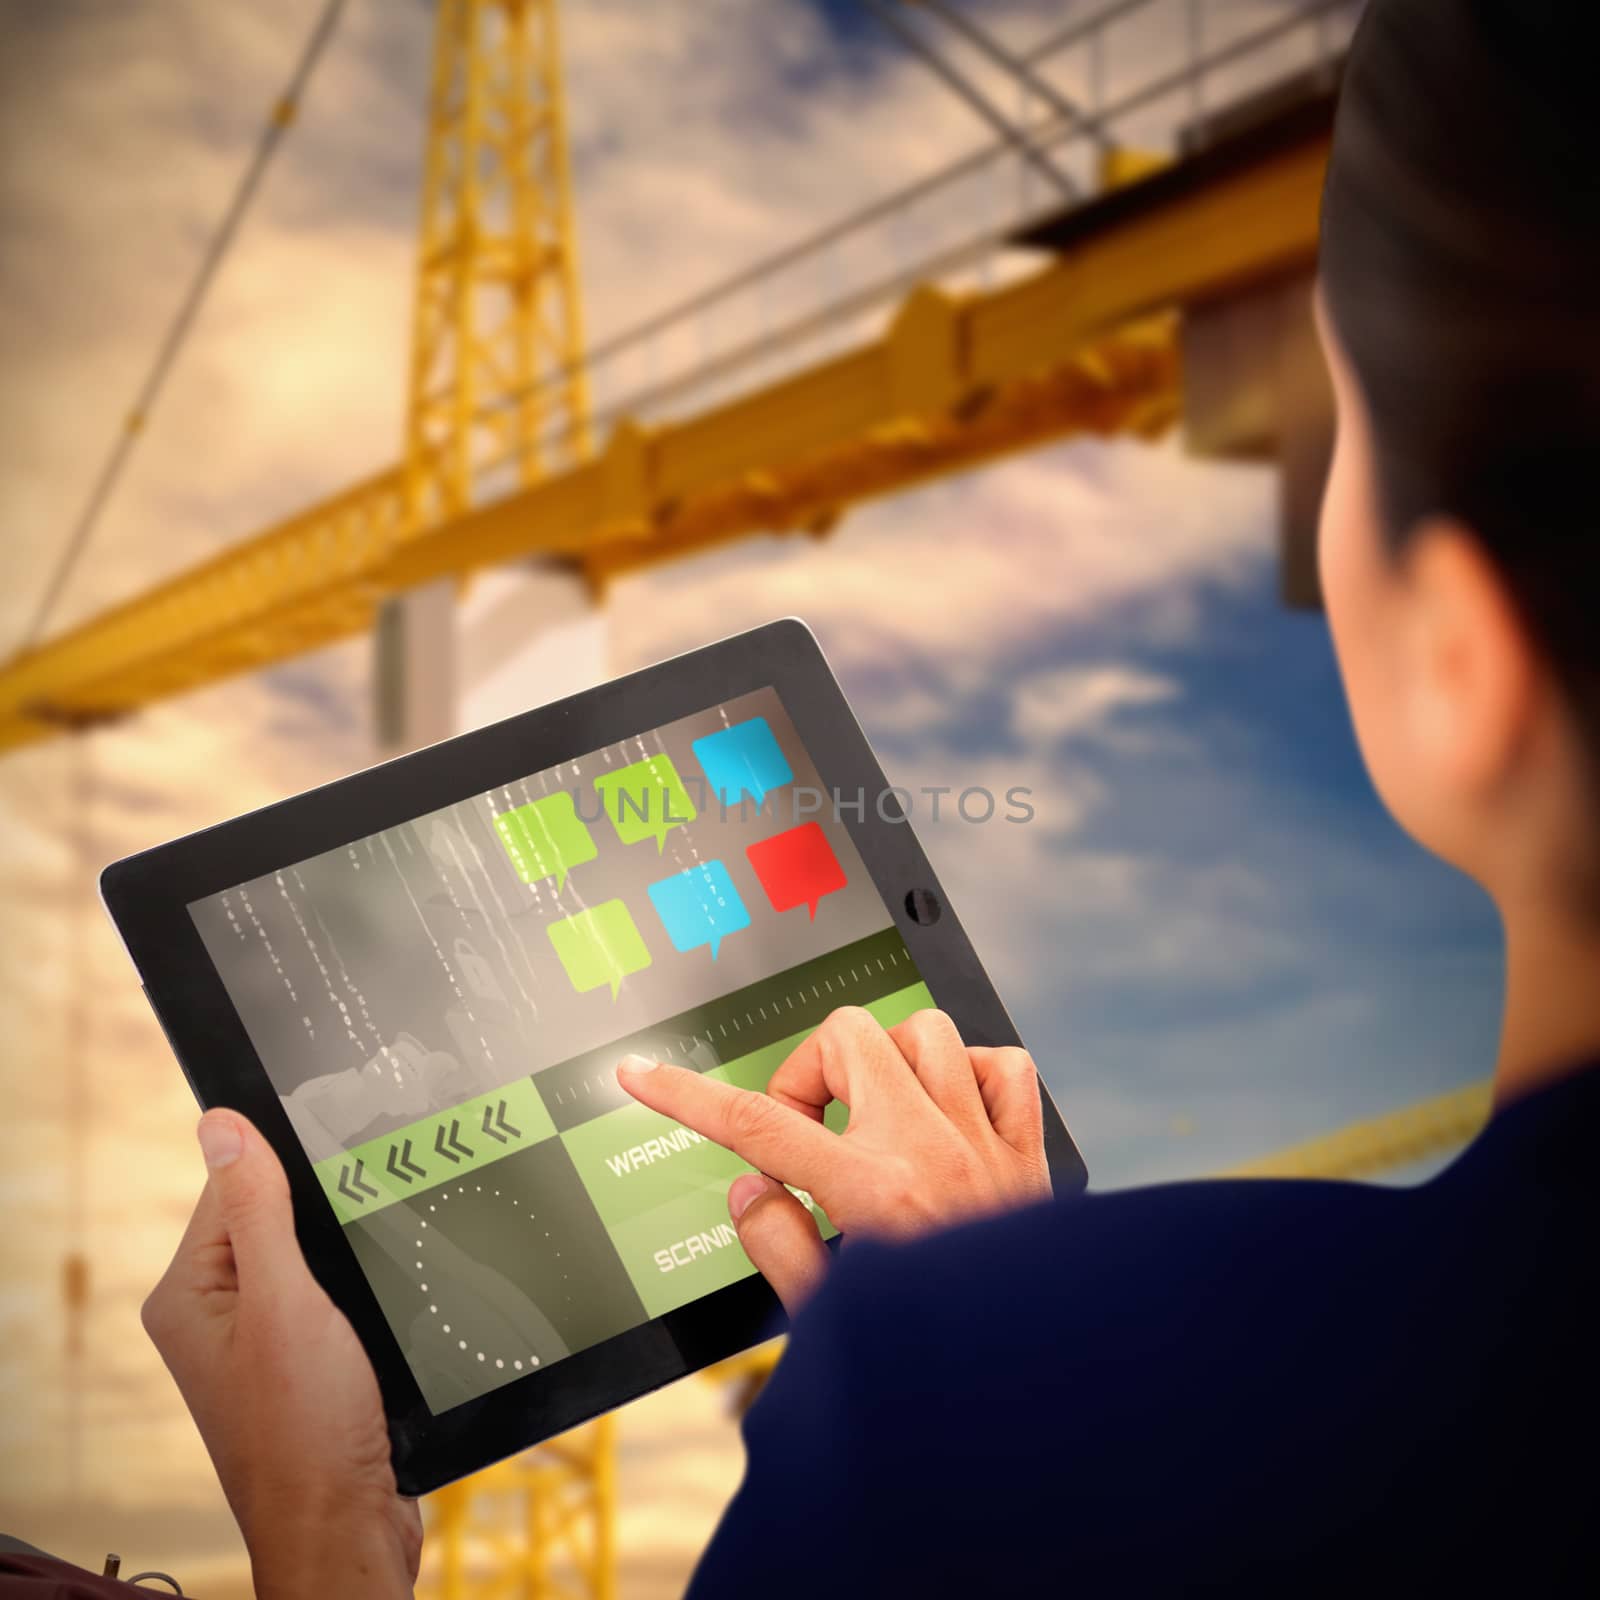 Businesswoman working on digital tablet over white background against 3d image of yellow and red cranes